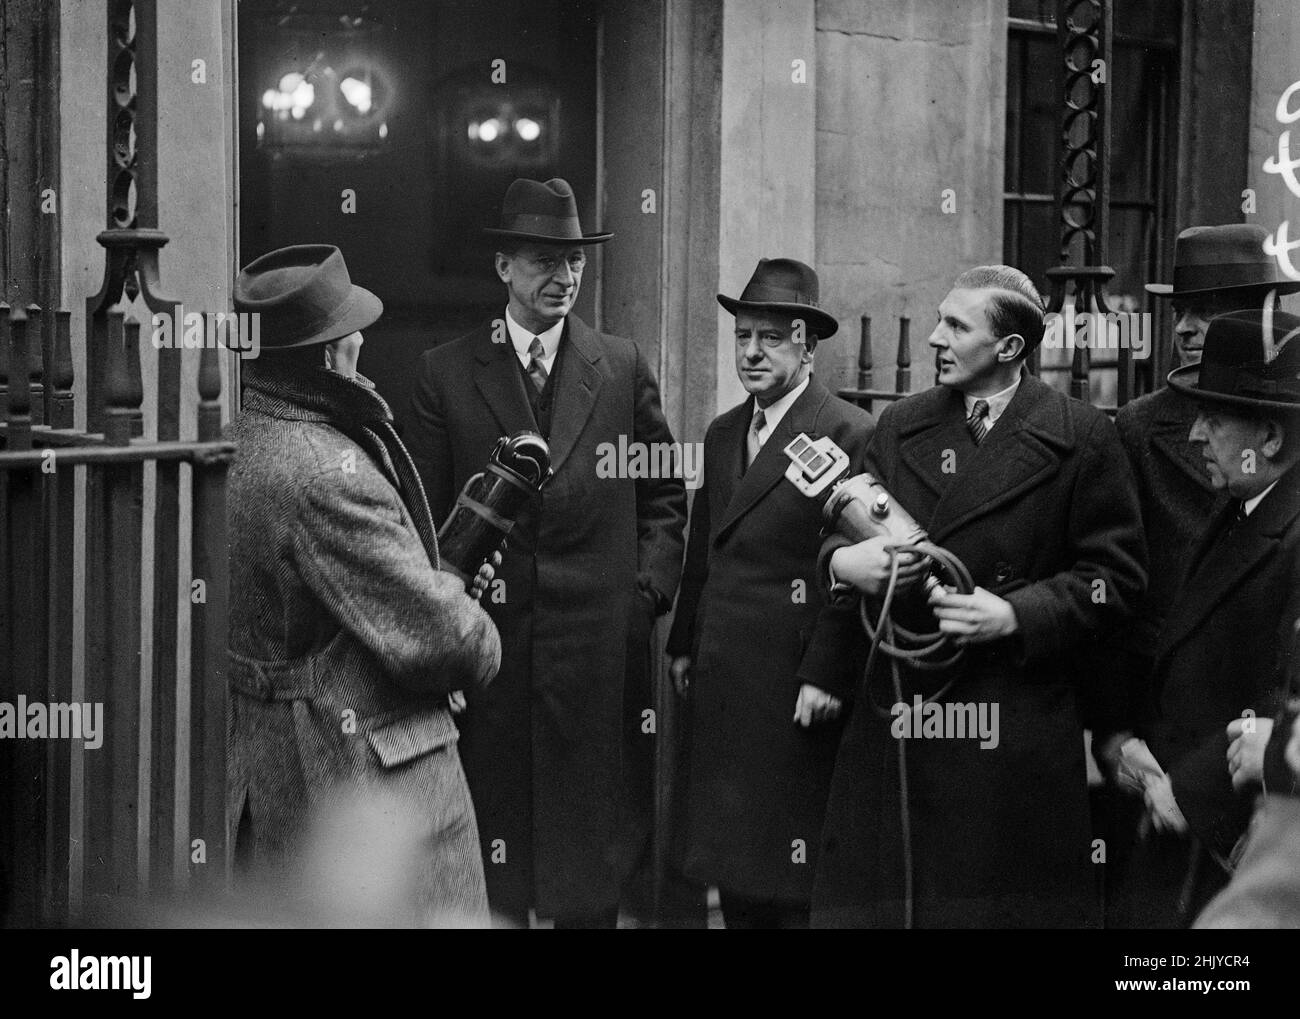 LONDON - JANUARY: First Taoiseach of Eire (Ireland) Eamon de Valera (1882-1975) in London for talks with the British Prime Minister at No. 10 Downing Street, in January 1938. Next to him is John Whelan Dulanty (1881-1955) the Irish High Commissioner (later Ambassador)  Credit: The DL Archive Collection/Alamy Stock Photo